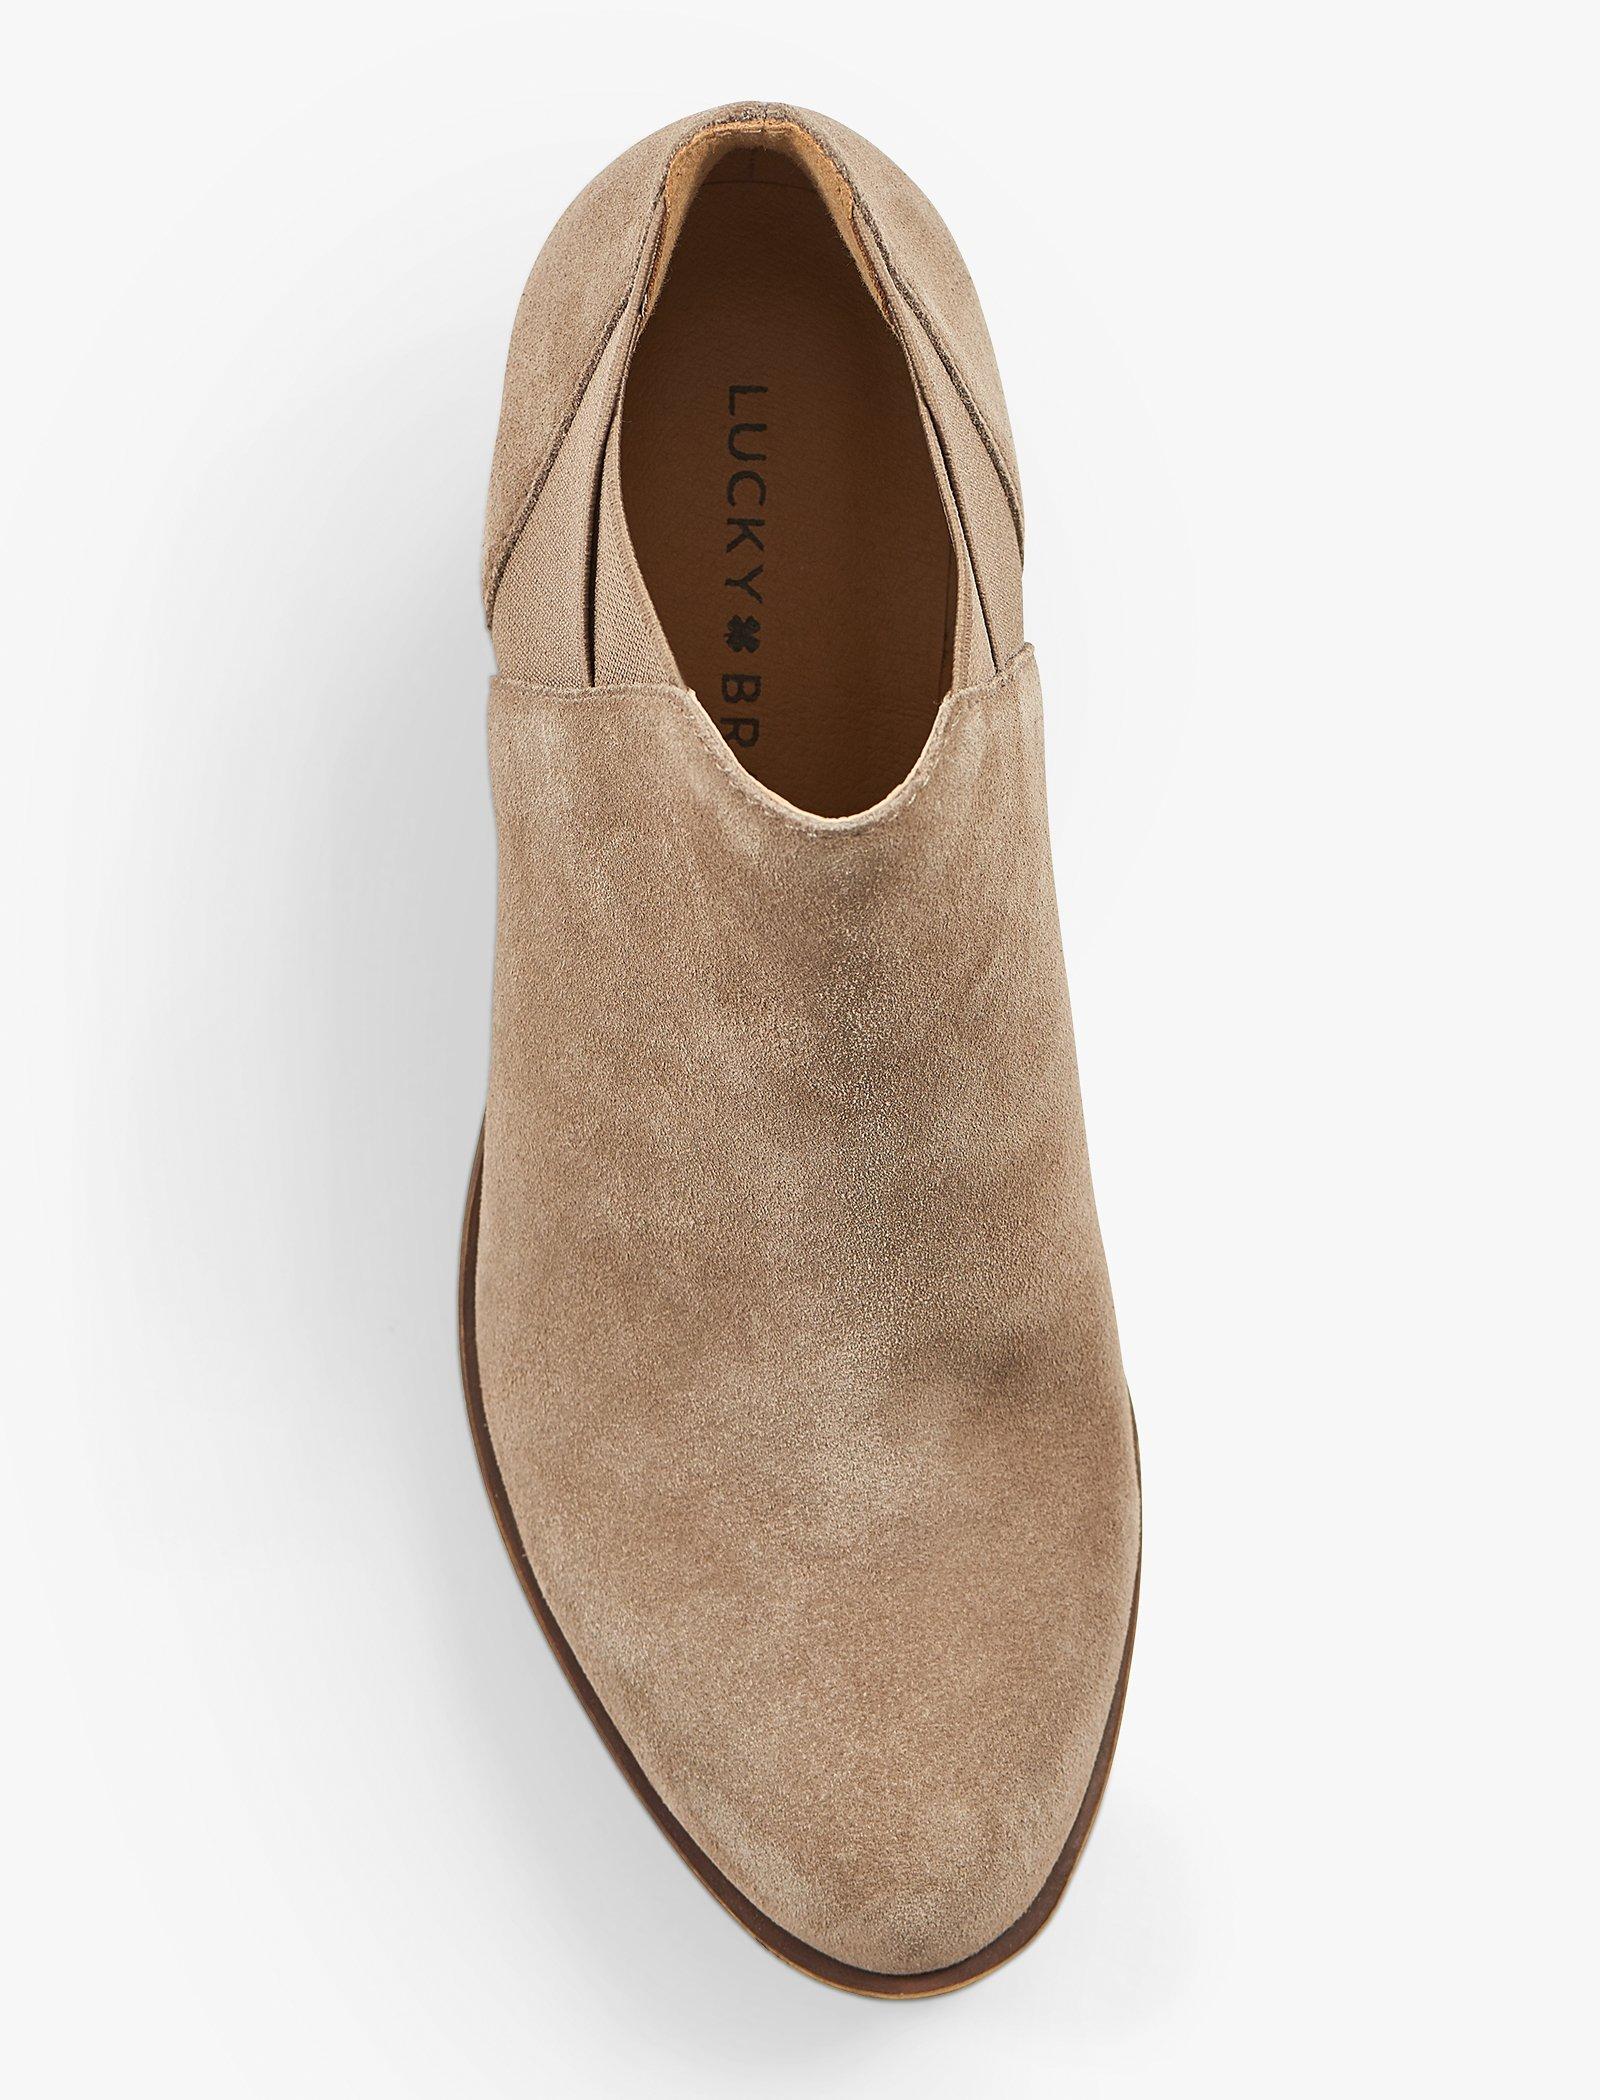 Baqira Suede Bootie | Lucky Brand